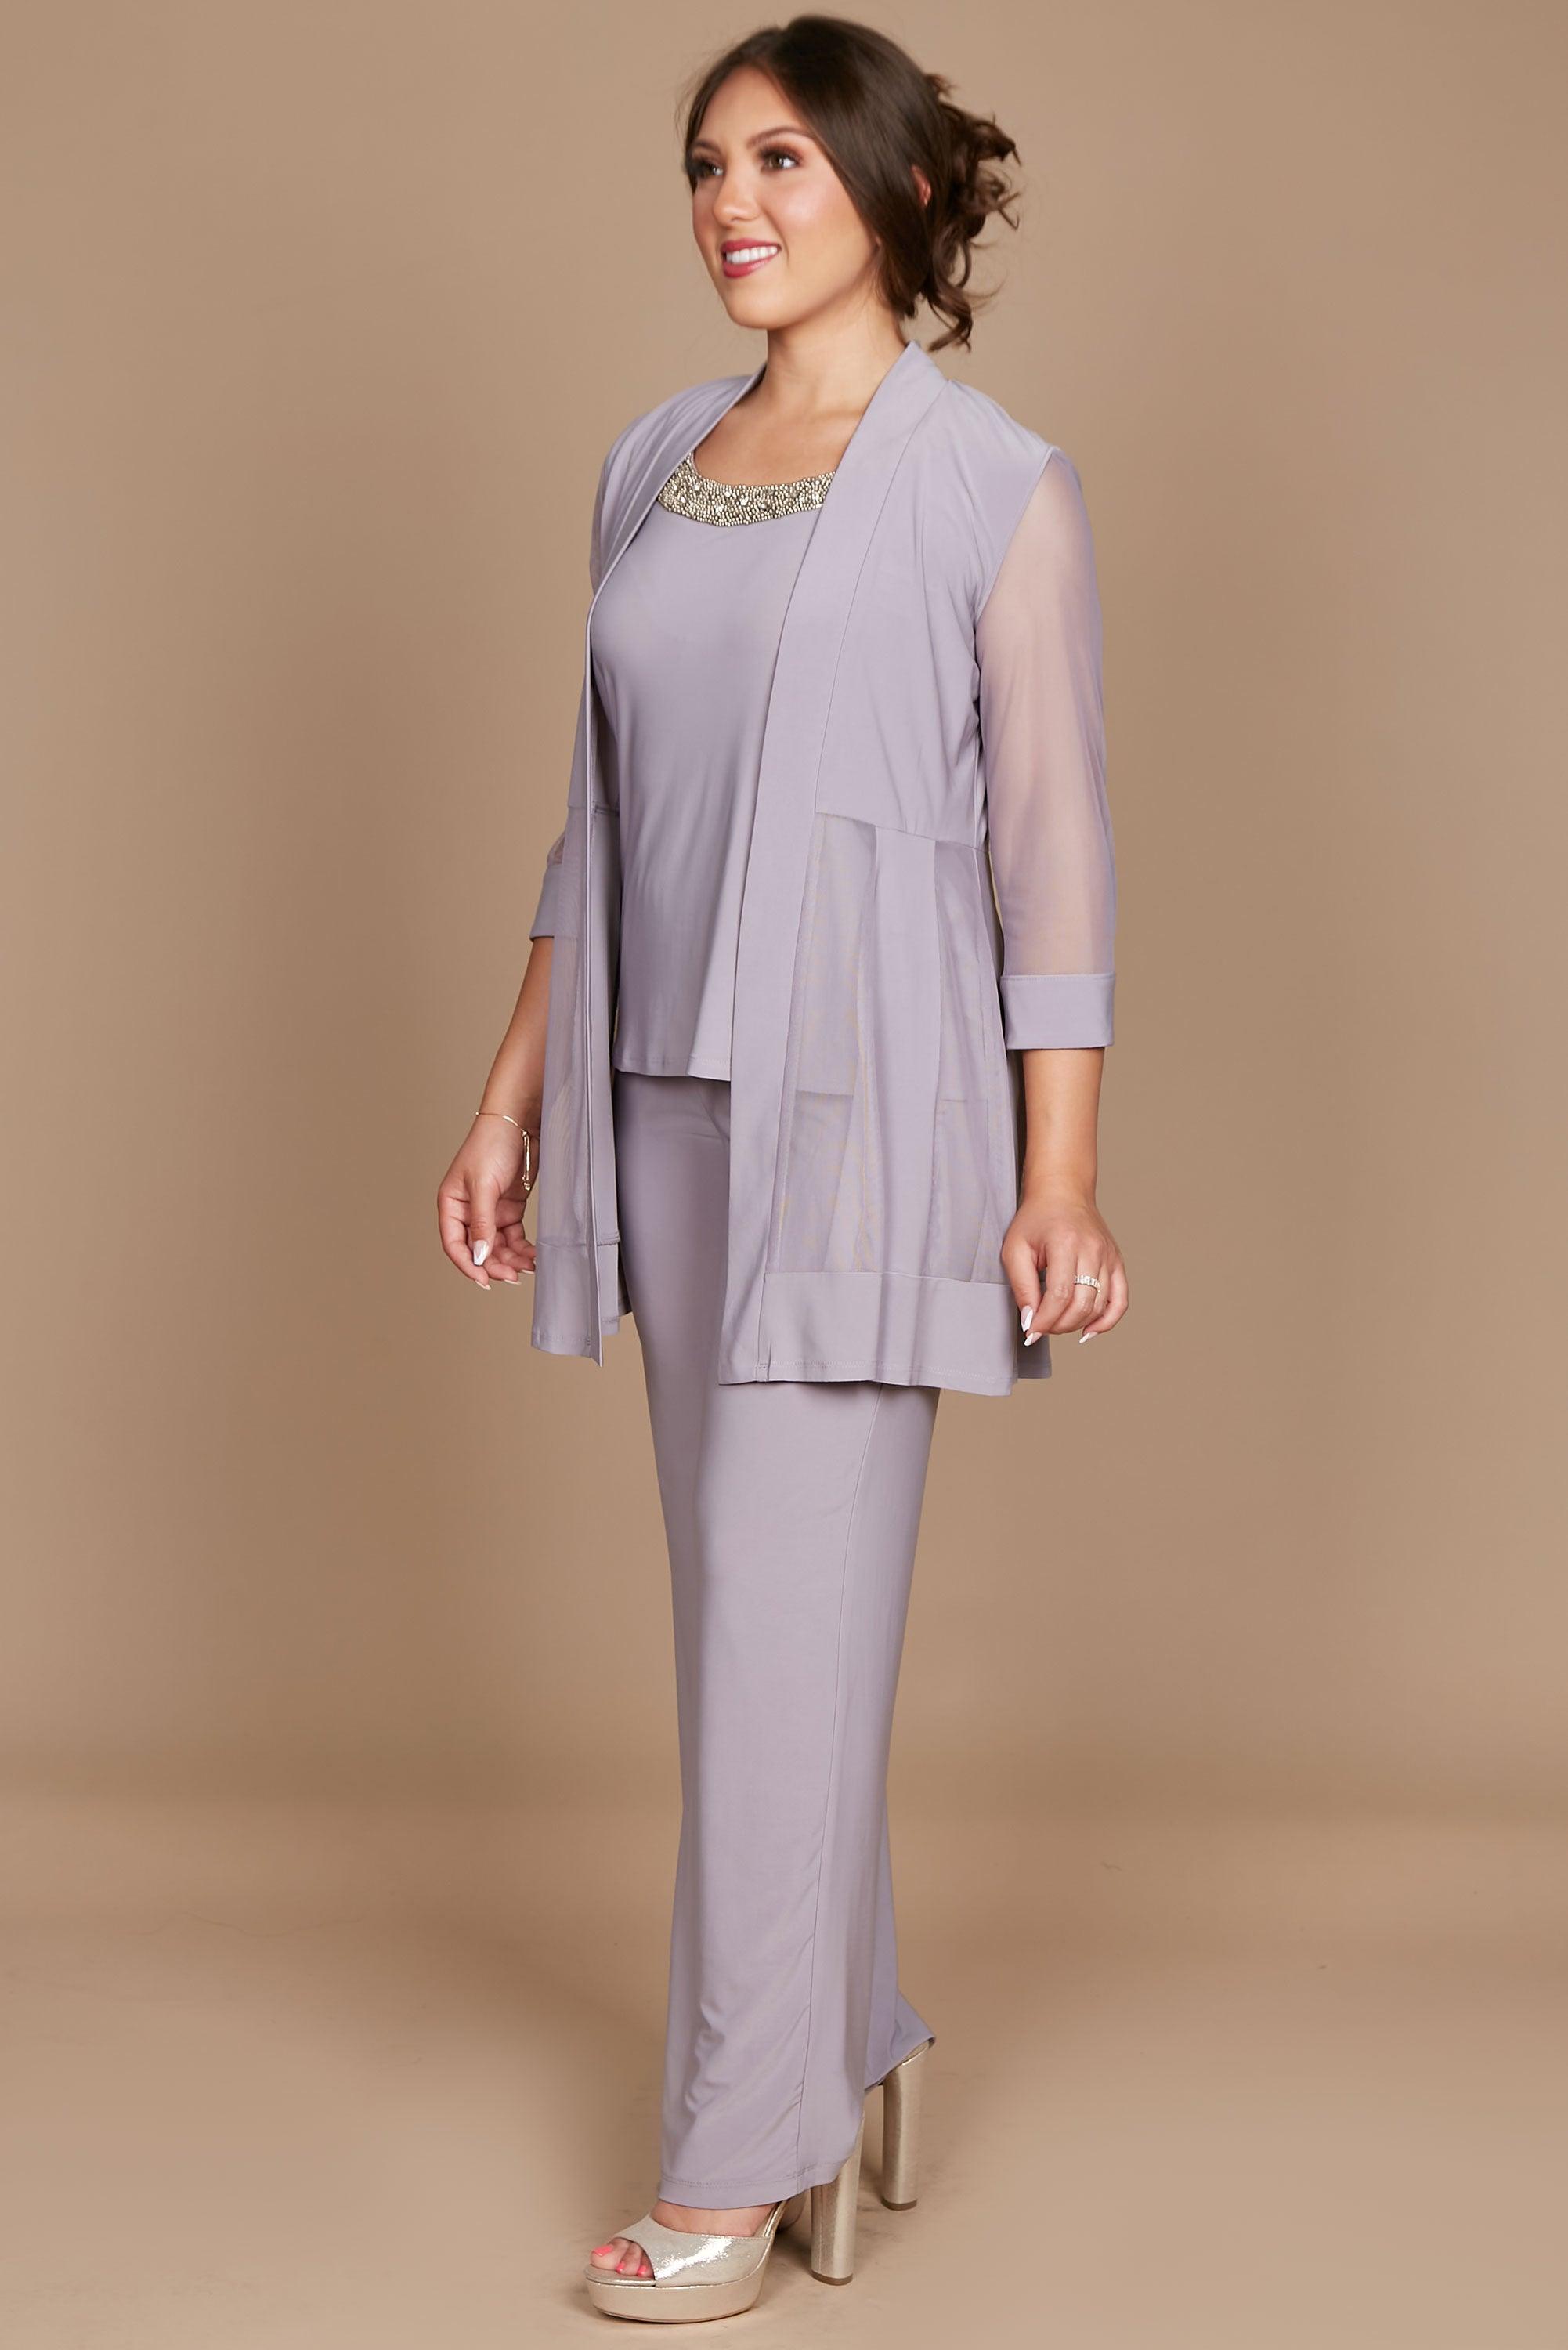 Plum R&M Richards 8764 Mother Of The Bride Formal Pants Suit for $19.99, –  The Dress Outlet